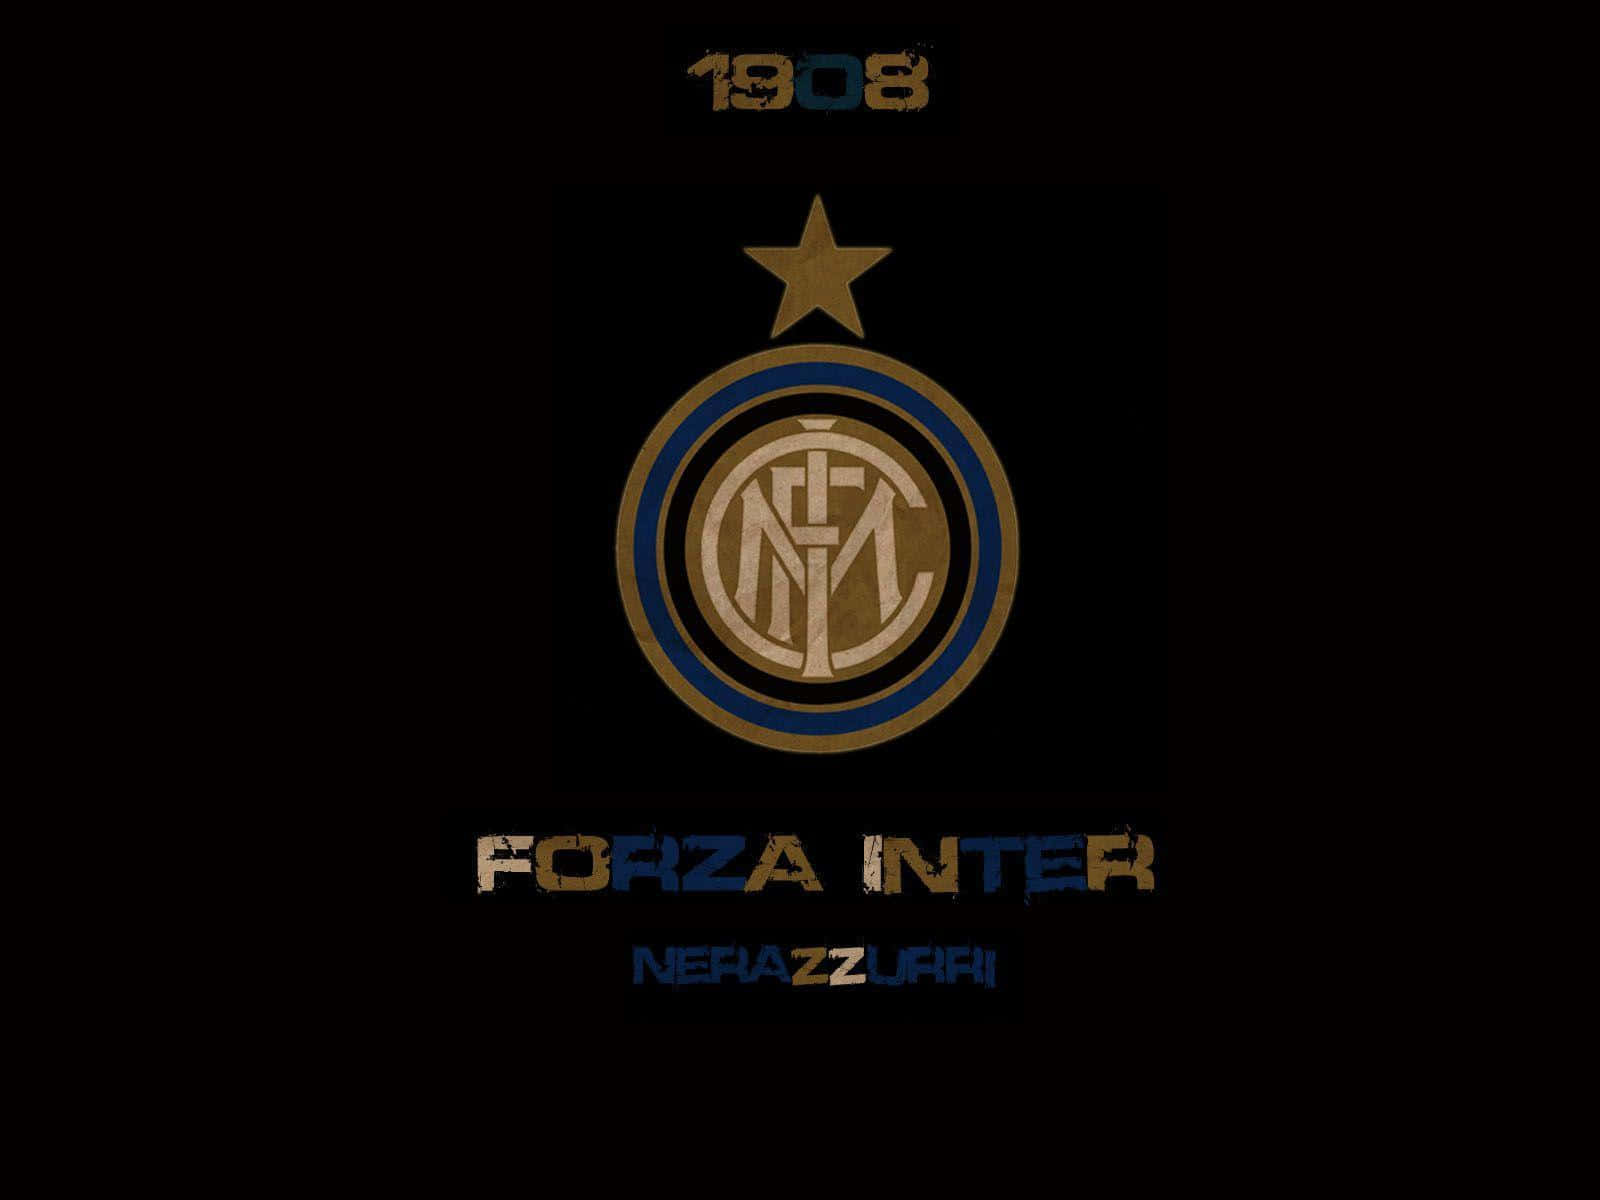 Inter Milan Team Crest on a Blue and Black Background Wallpaper